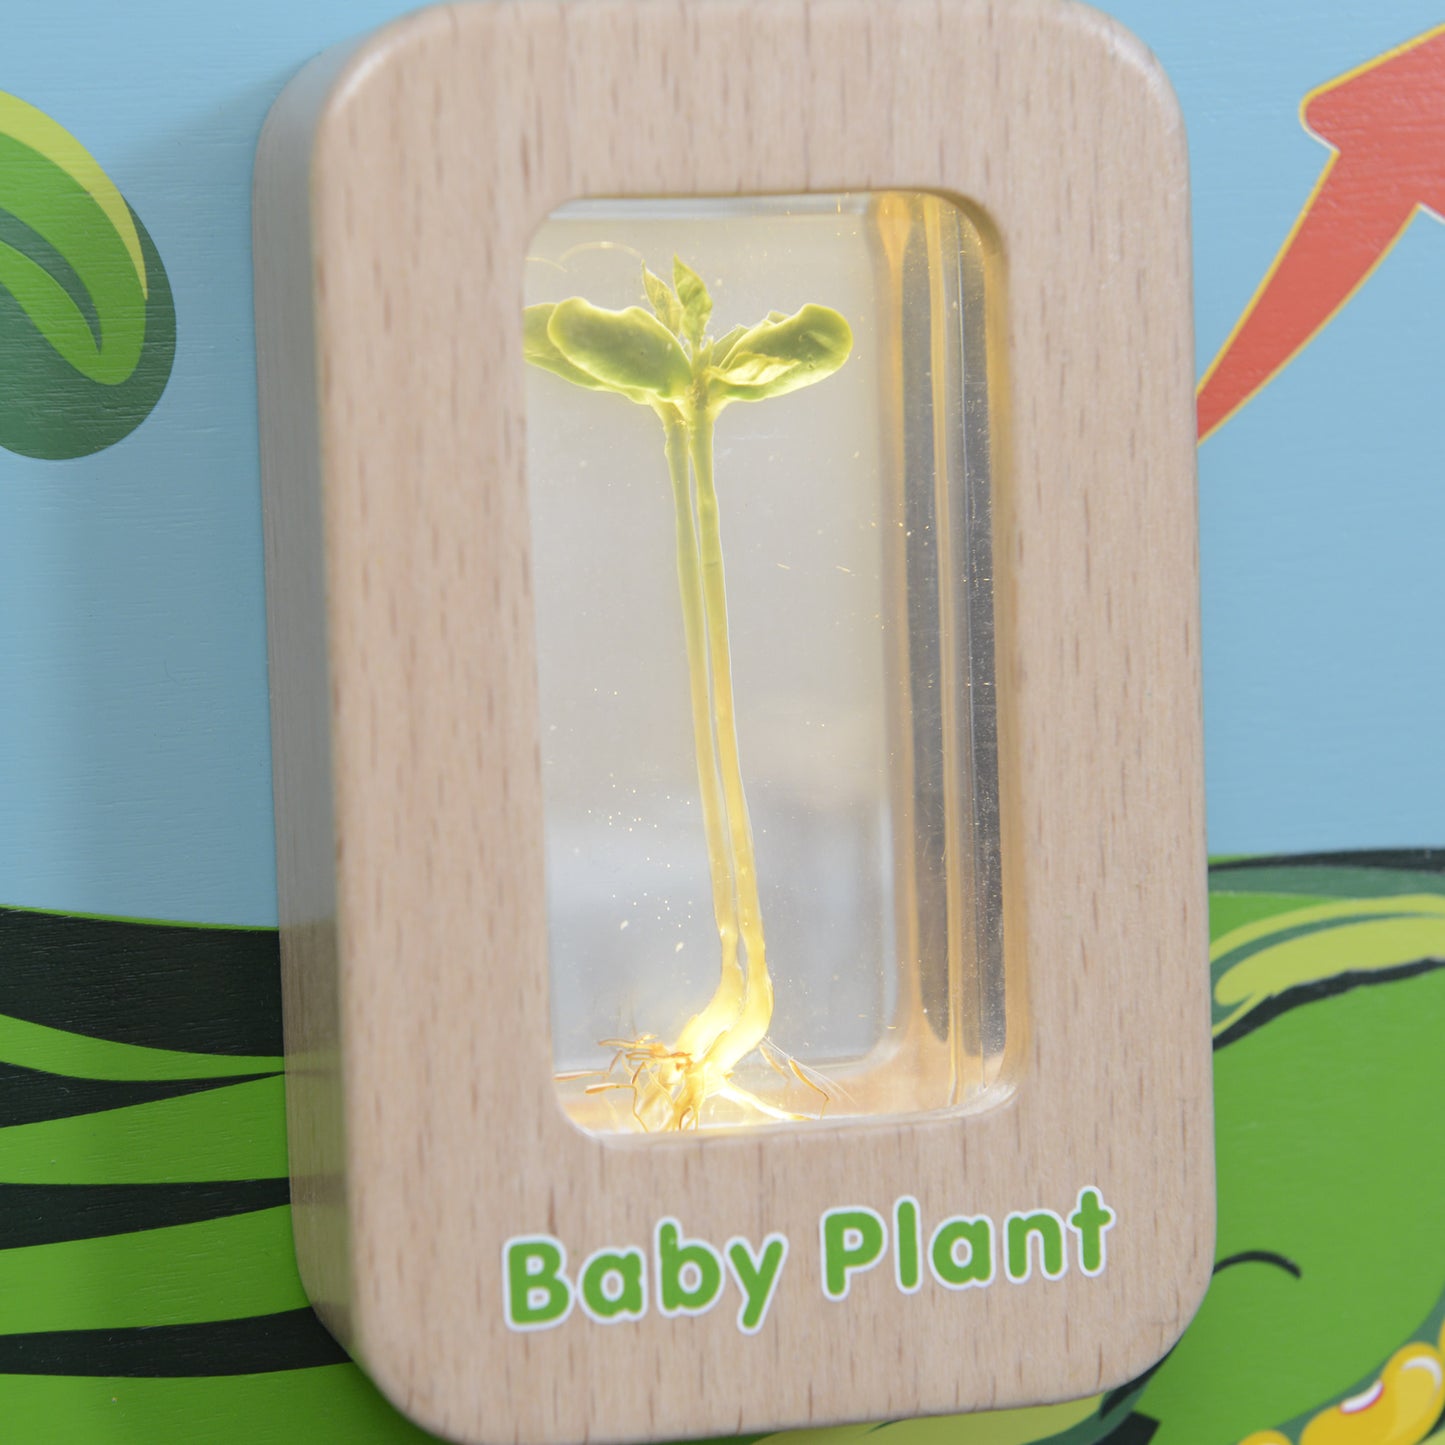 Masterkidz Wall Elements - Light-Up Plant Life Cycle Stages Panel 牆面遊戲-植物成長階段標本探索燈板